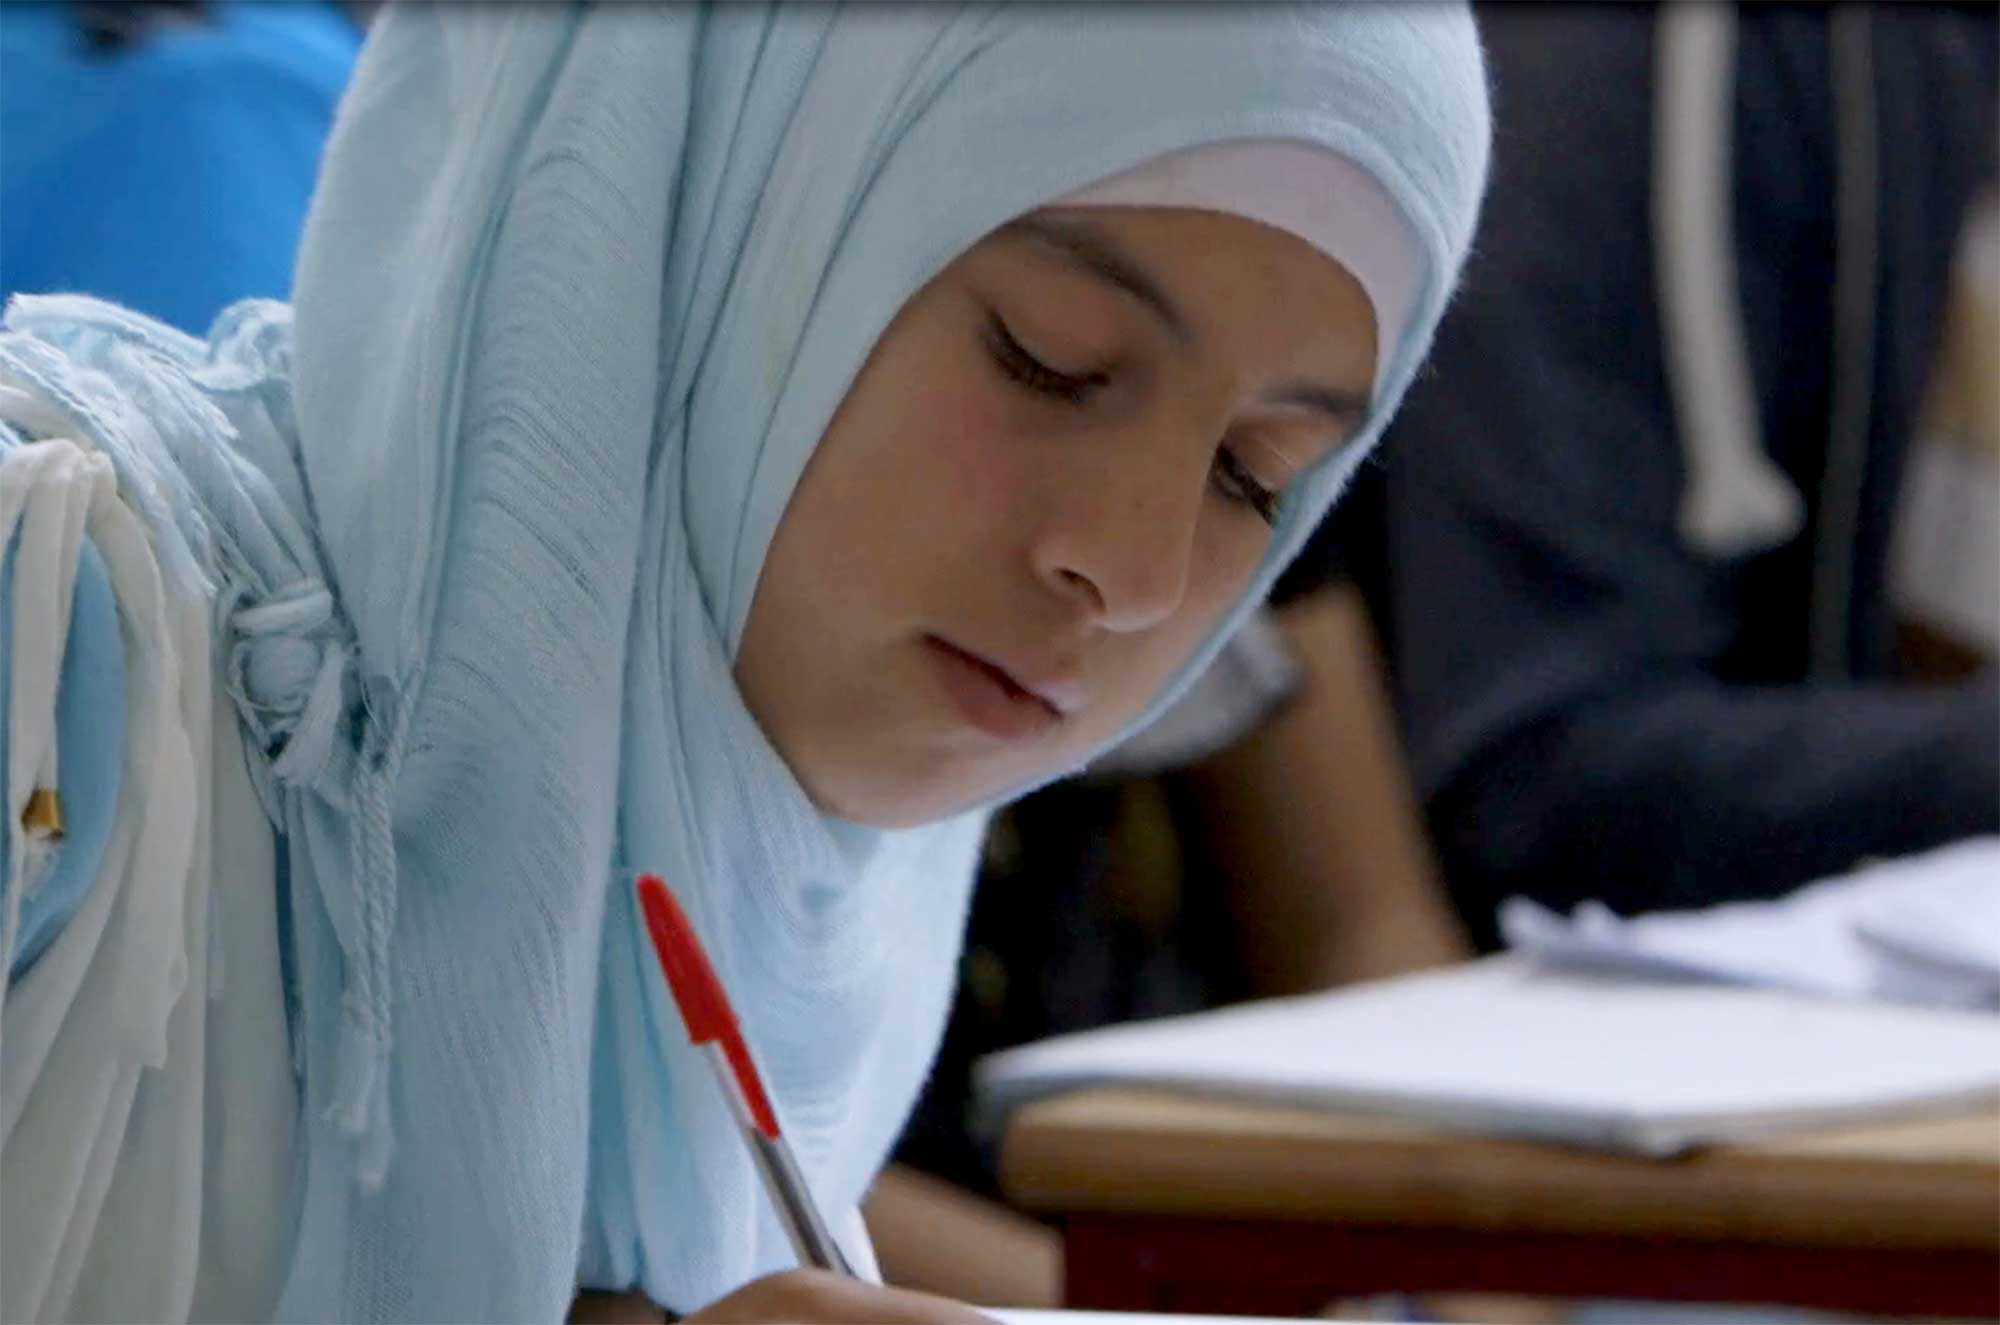 Syrian refugees in Lebanon need help learning English so that they can re-enter the school system.